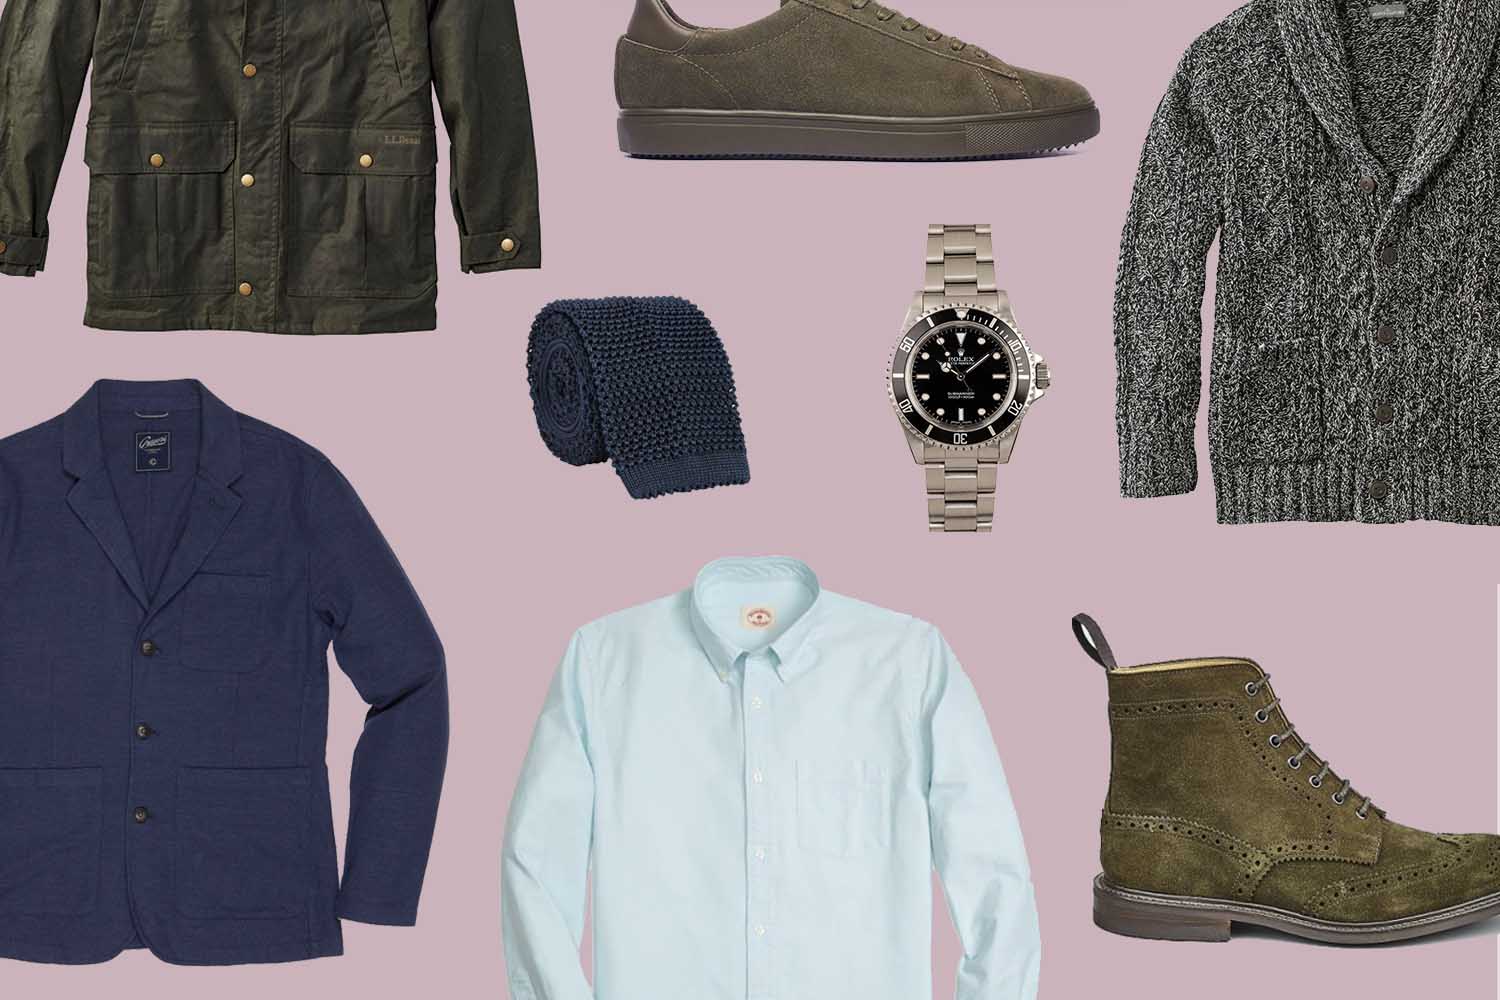 The 7 Fall Wardrobe Essentials Every Man Needs, On Two Different Budgets